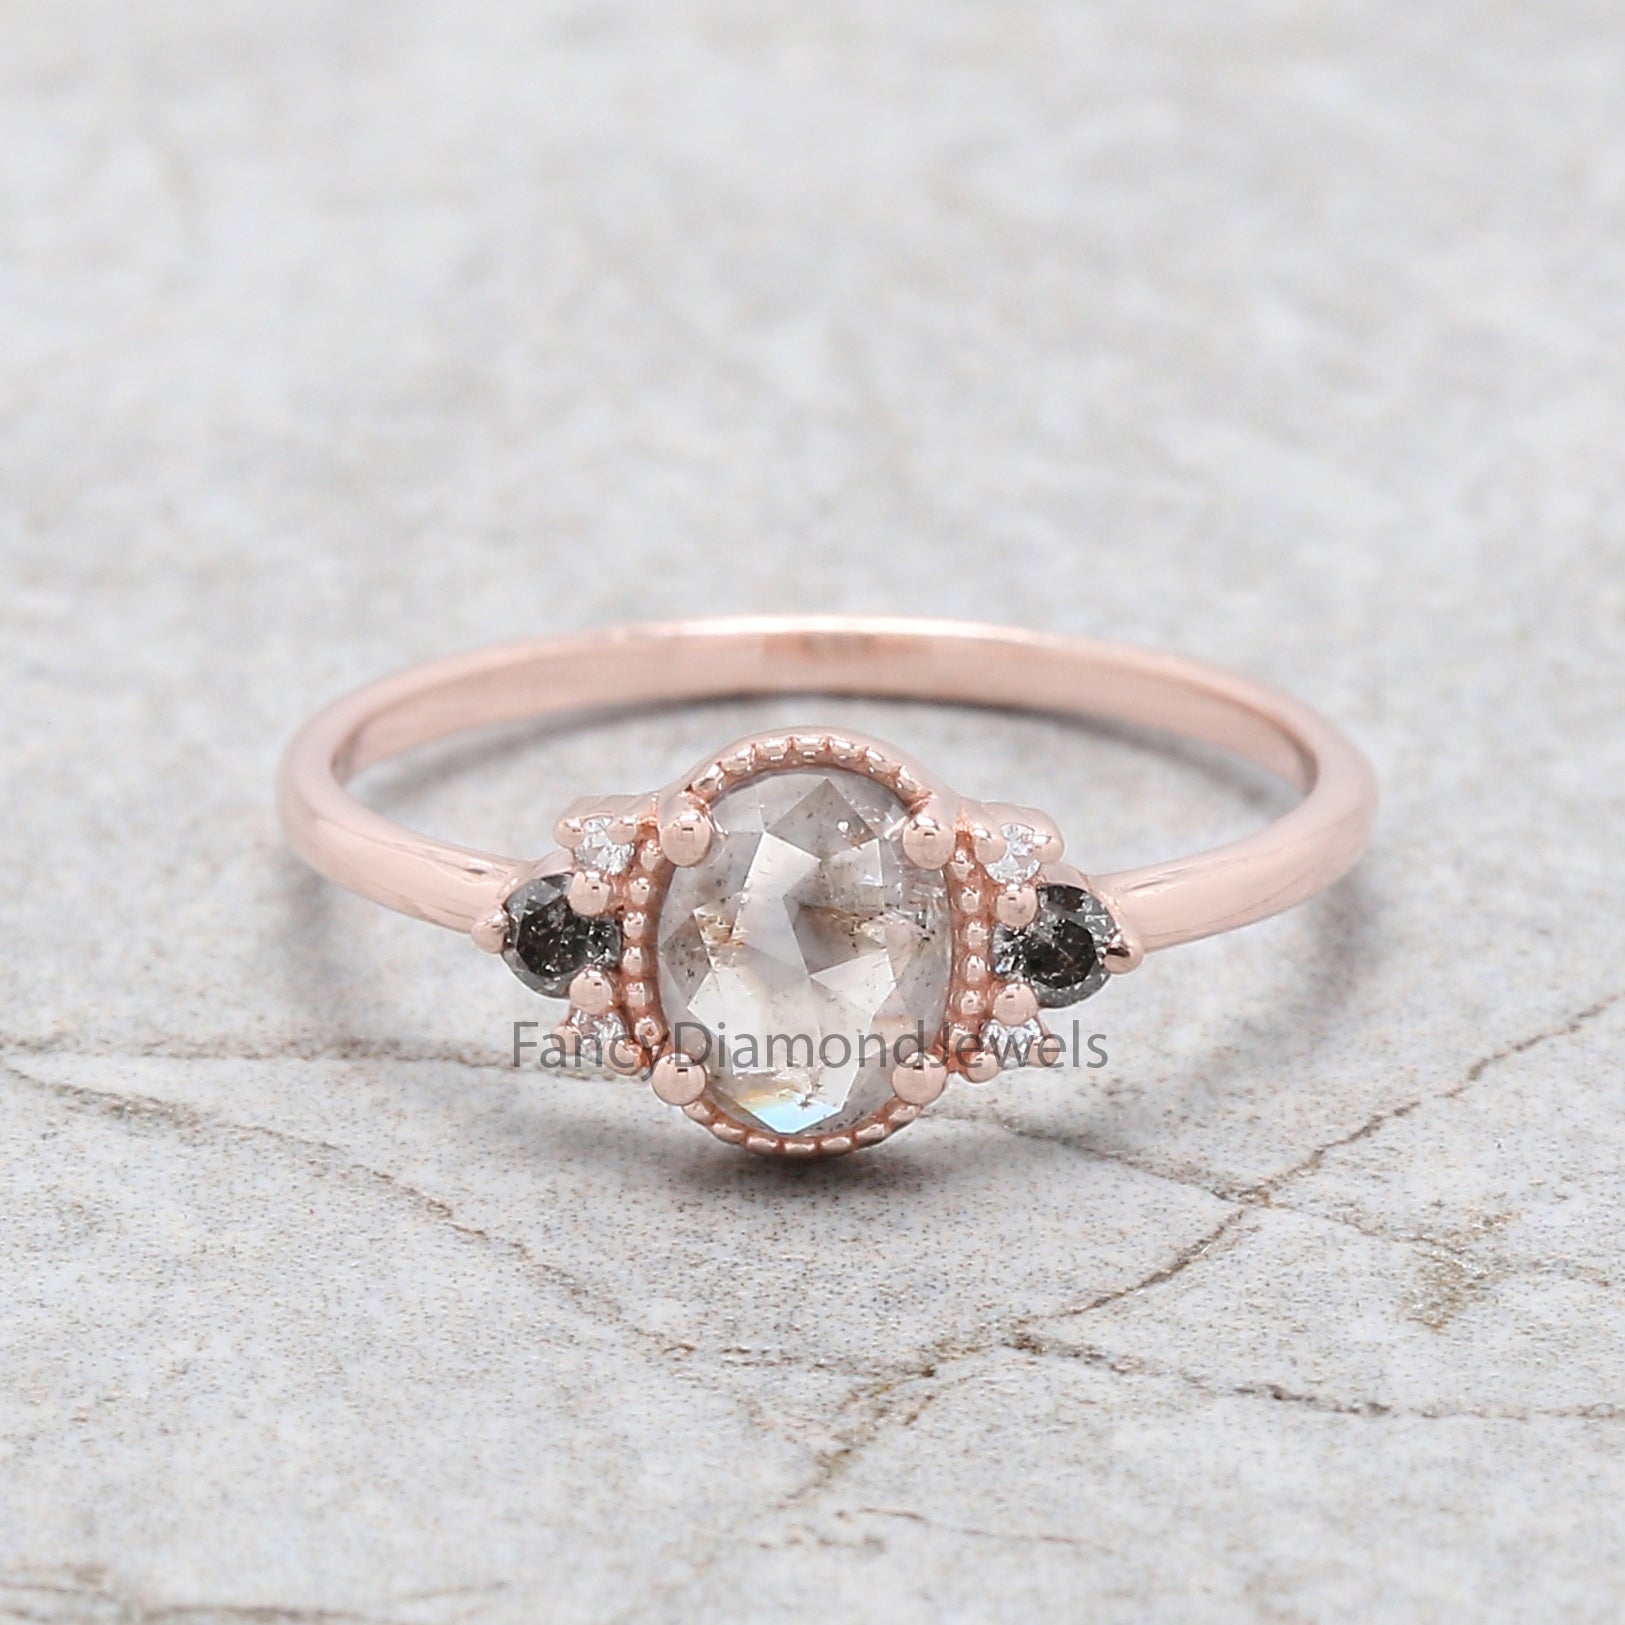 Oval Cut Salt And Pepper Diamond Ring 0.68 Ct 6.27 MM Oval Diamond Ring 14K Solid Rose Gold Silver Oval Engagement Ring Gift For Her QN2185